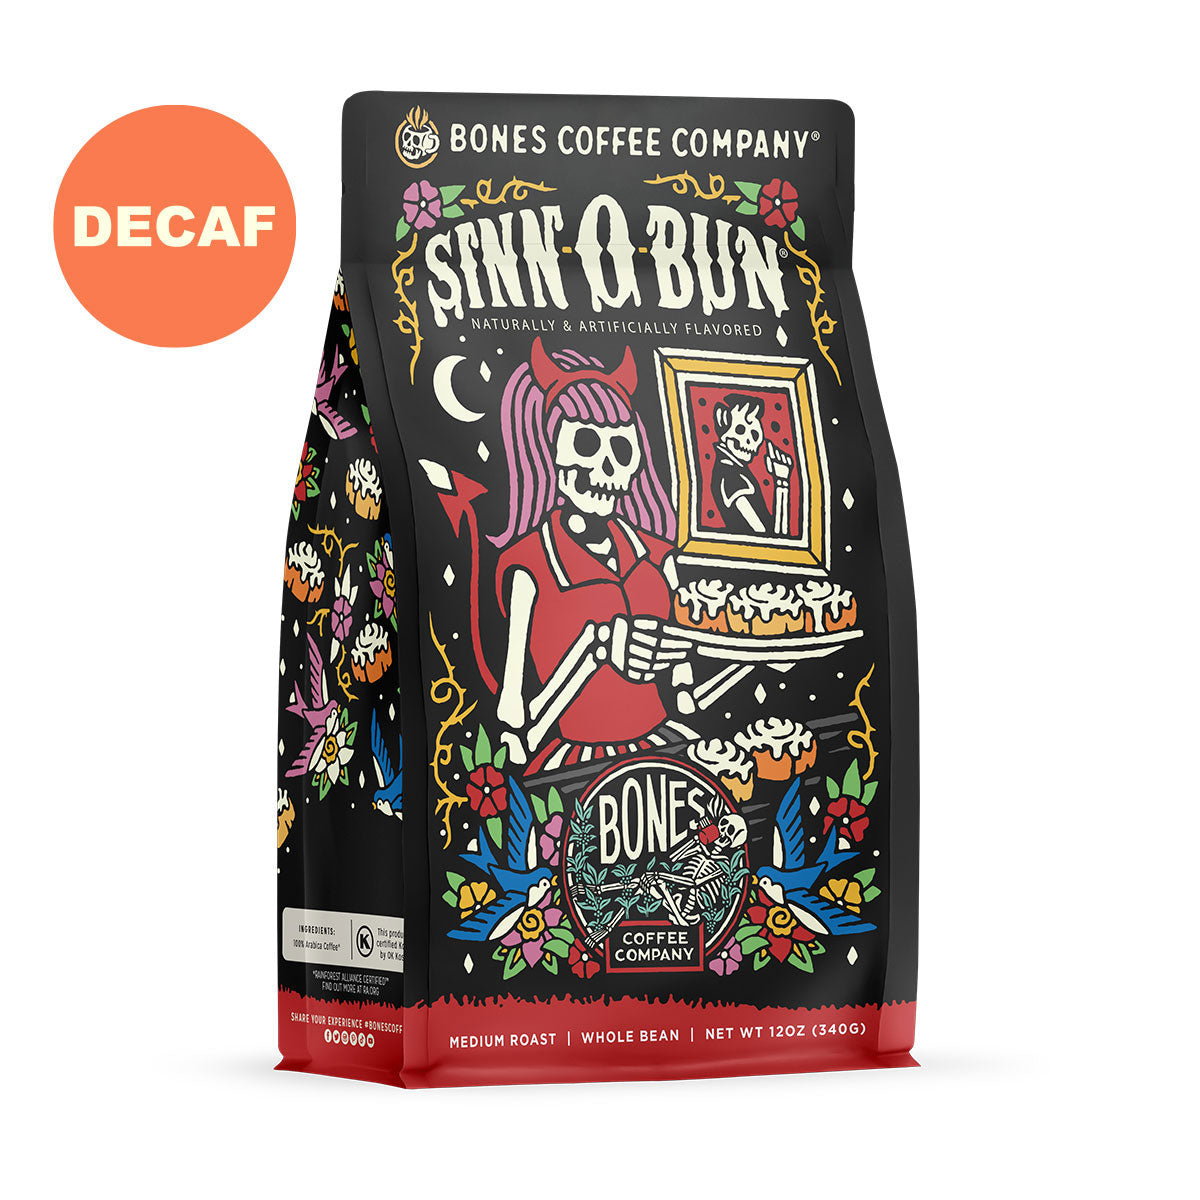 The front of a 12 ounce bag of Bones Coffee Company Sinn-O-Bun coffee. Its flavor is cinnamon bun, and it has a skeleton with pink hair wearing a horned headband holding a tray of cinnamon buns on the art. A sticker says decaf.